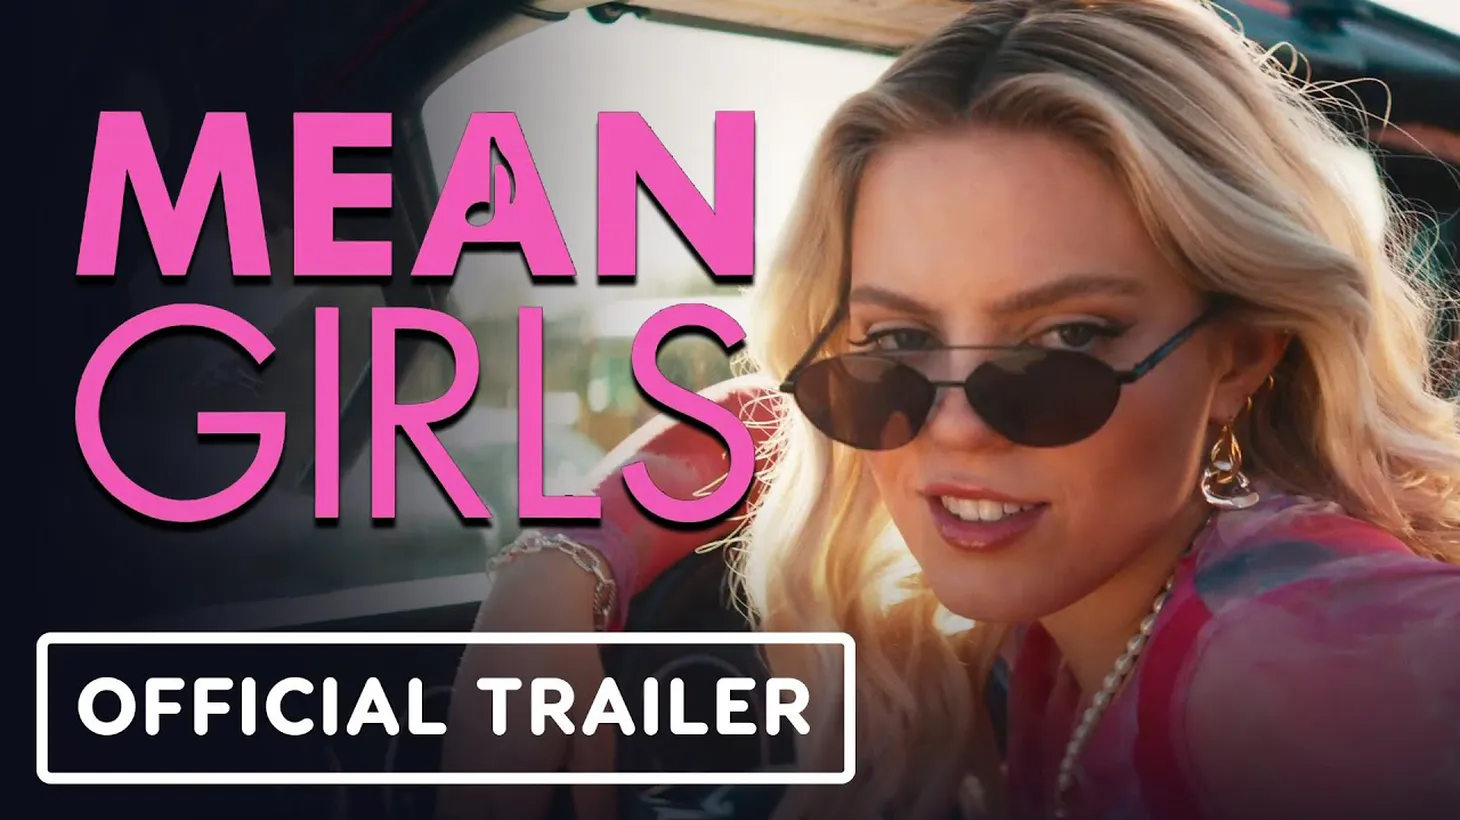 Mean Girls is the film adaptation of the Broadway based on original 2004 film.